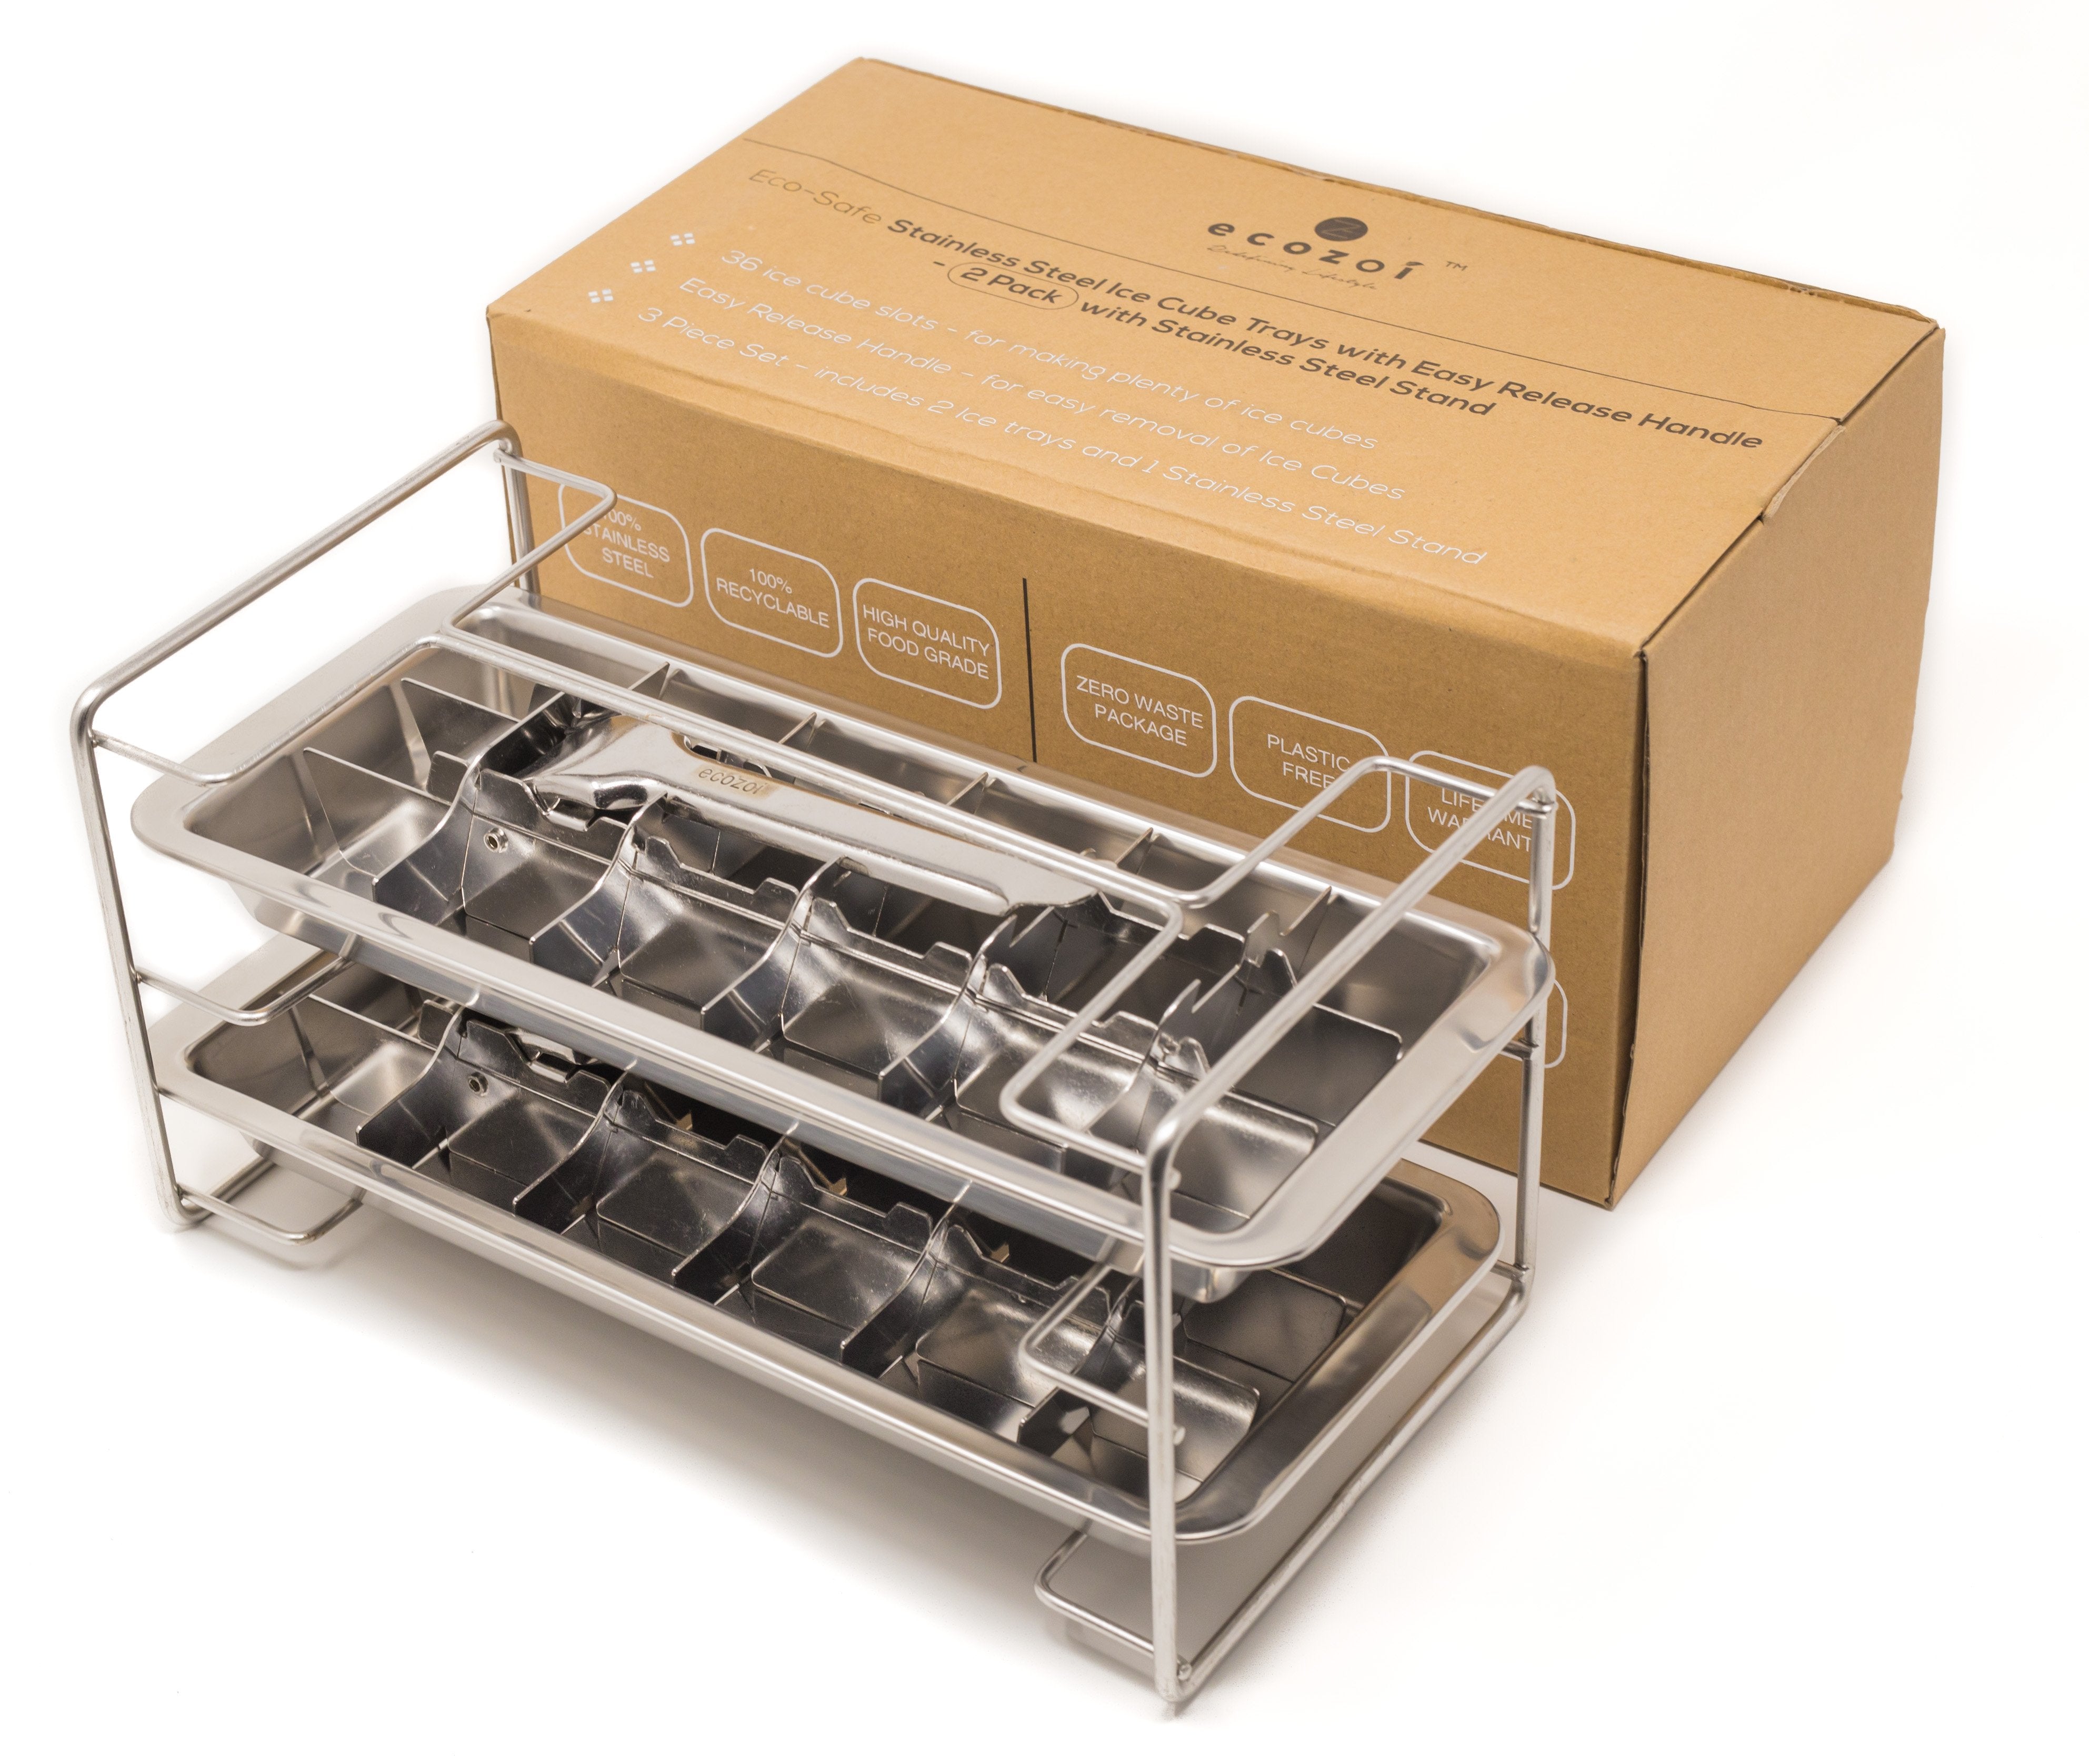 Ecozoi Stainless Steel Ice Cube Trays - 2 PACK - with Easy Release